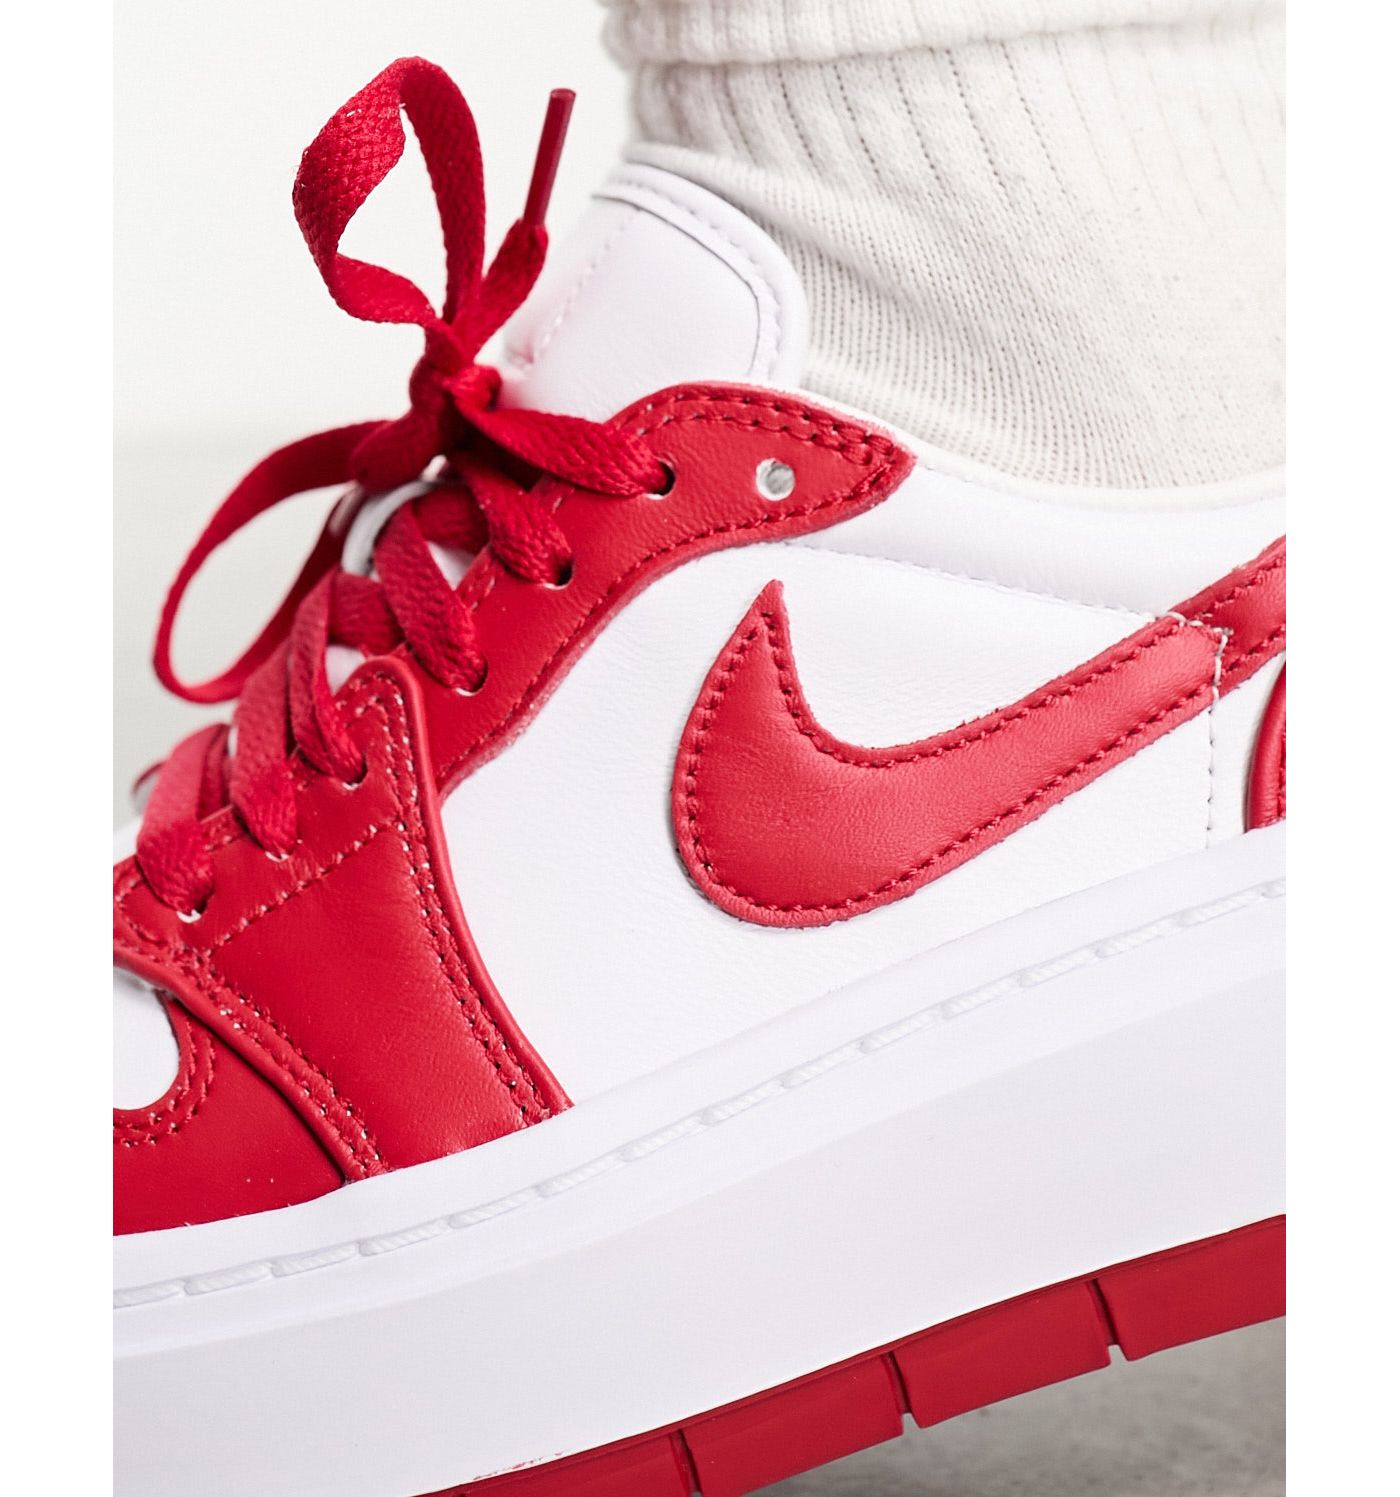 Air Jordan 1 Elelvate low trainers in white and fire red